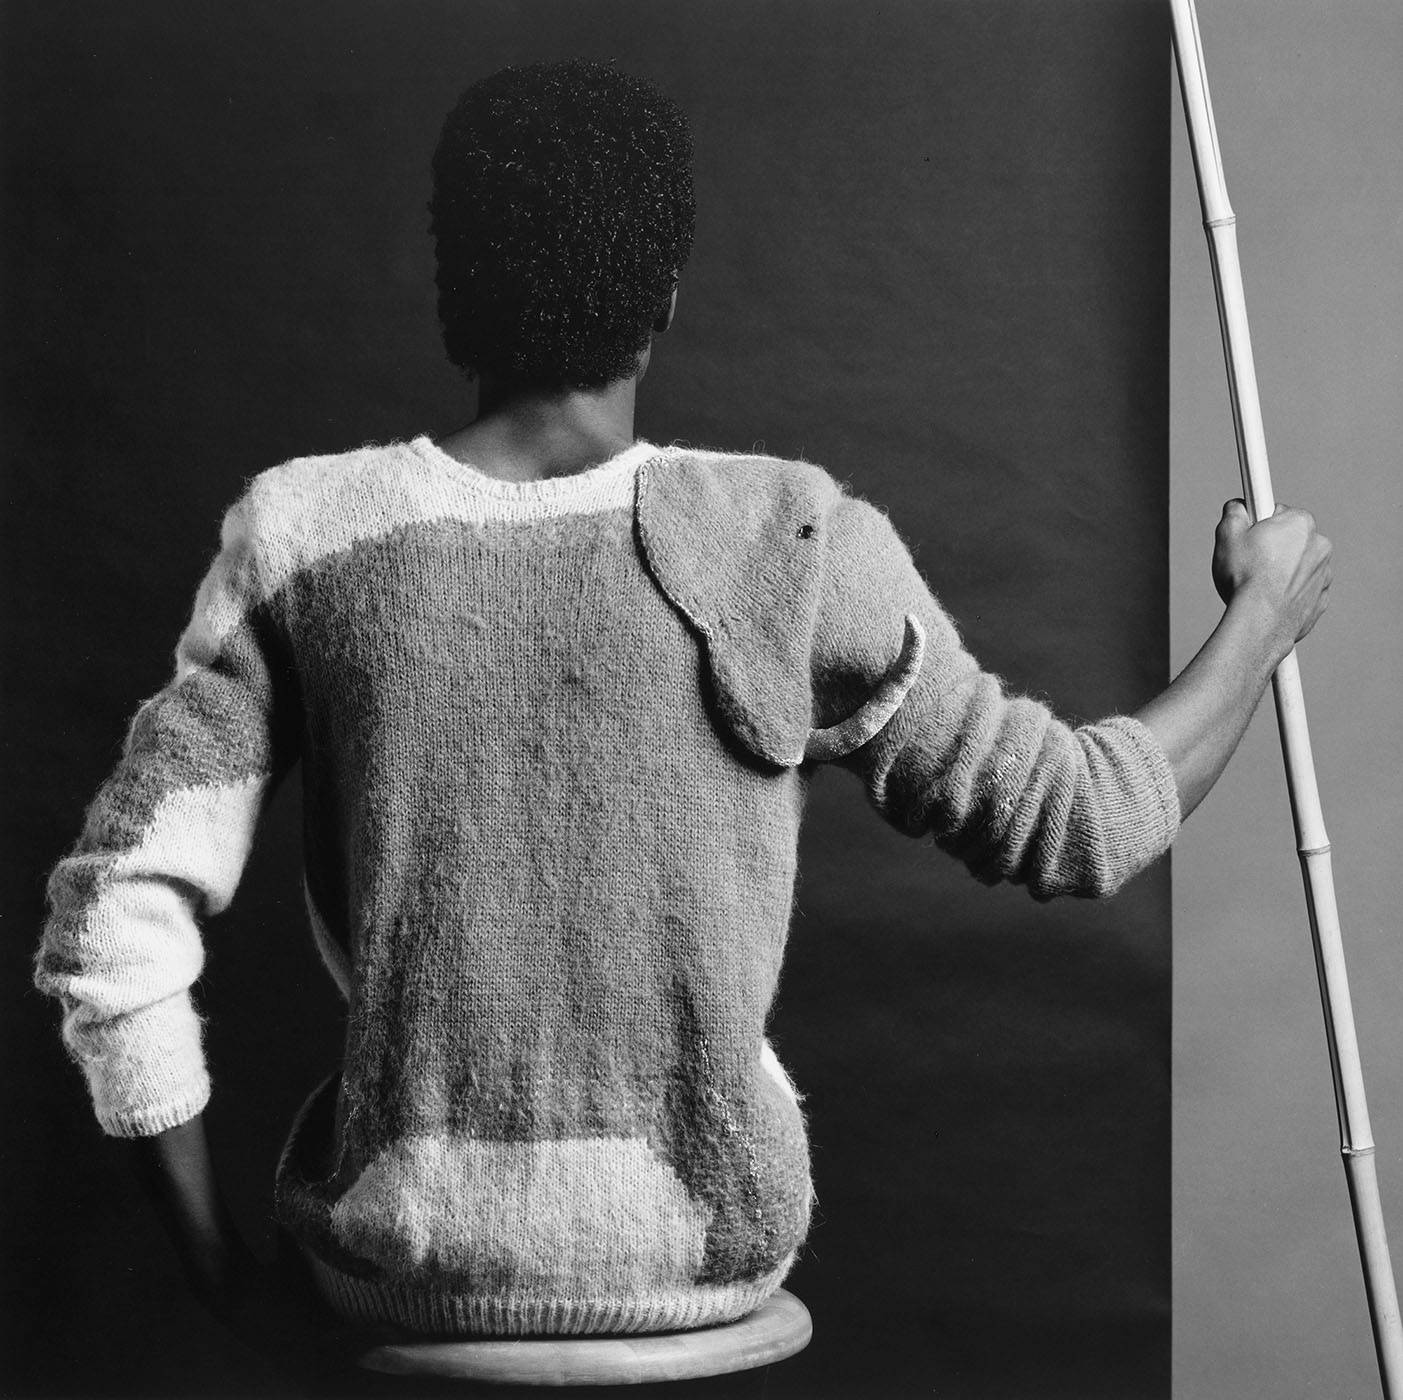 Phillip Prioleau, 1981 / © Robert Mapplethorpe Foundation. Used by permission.